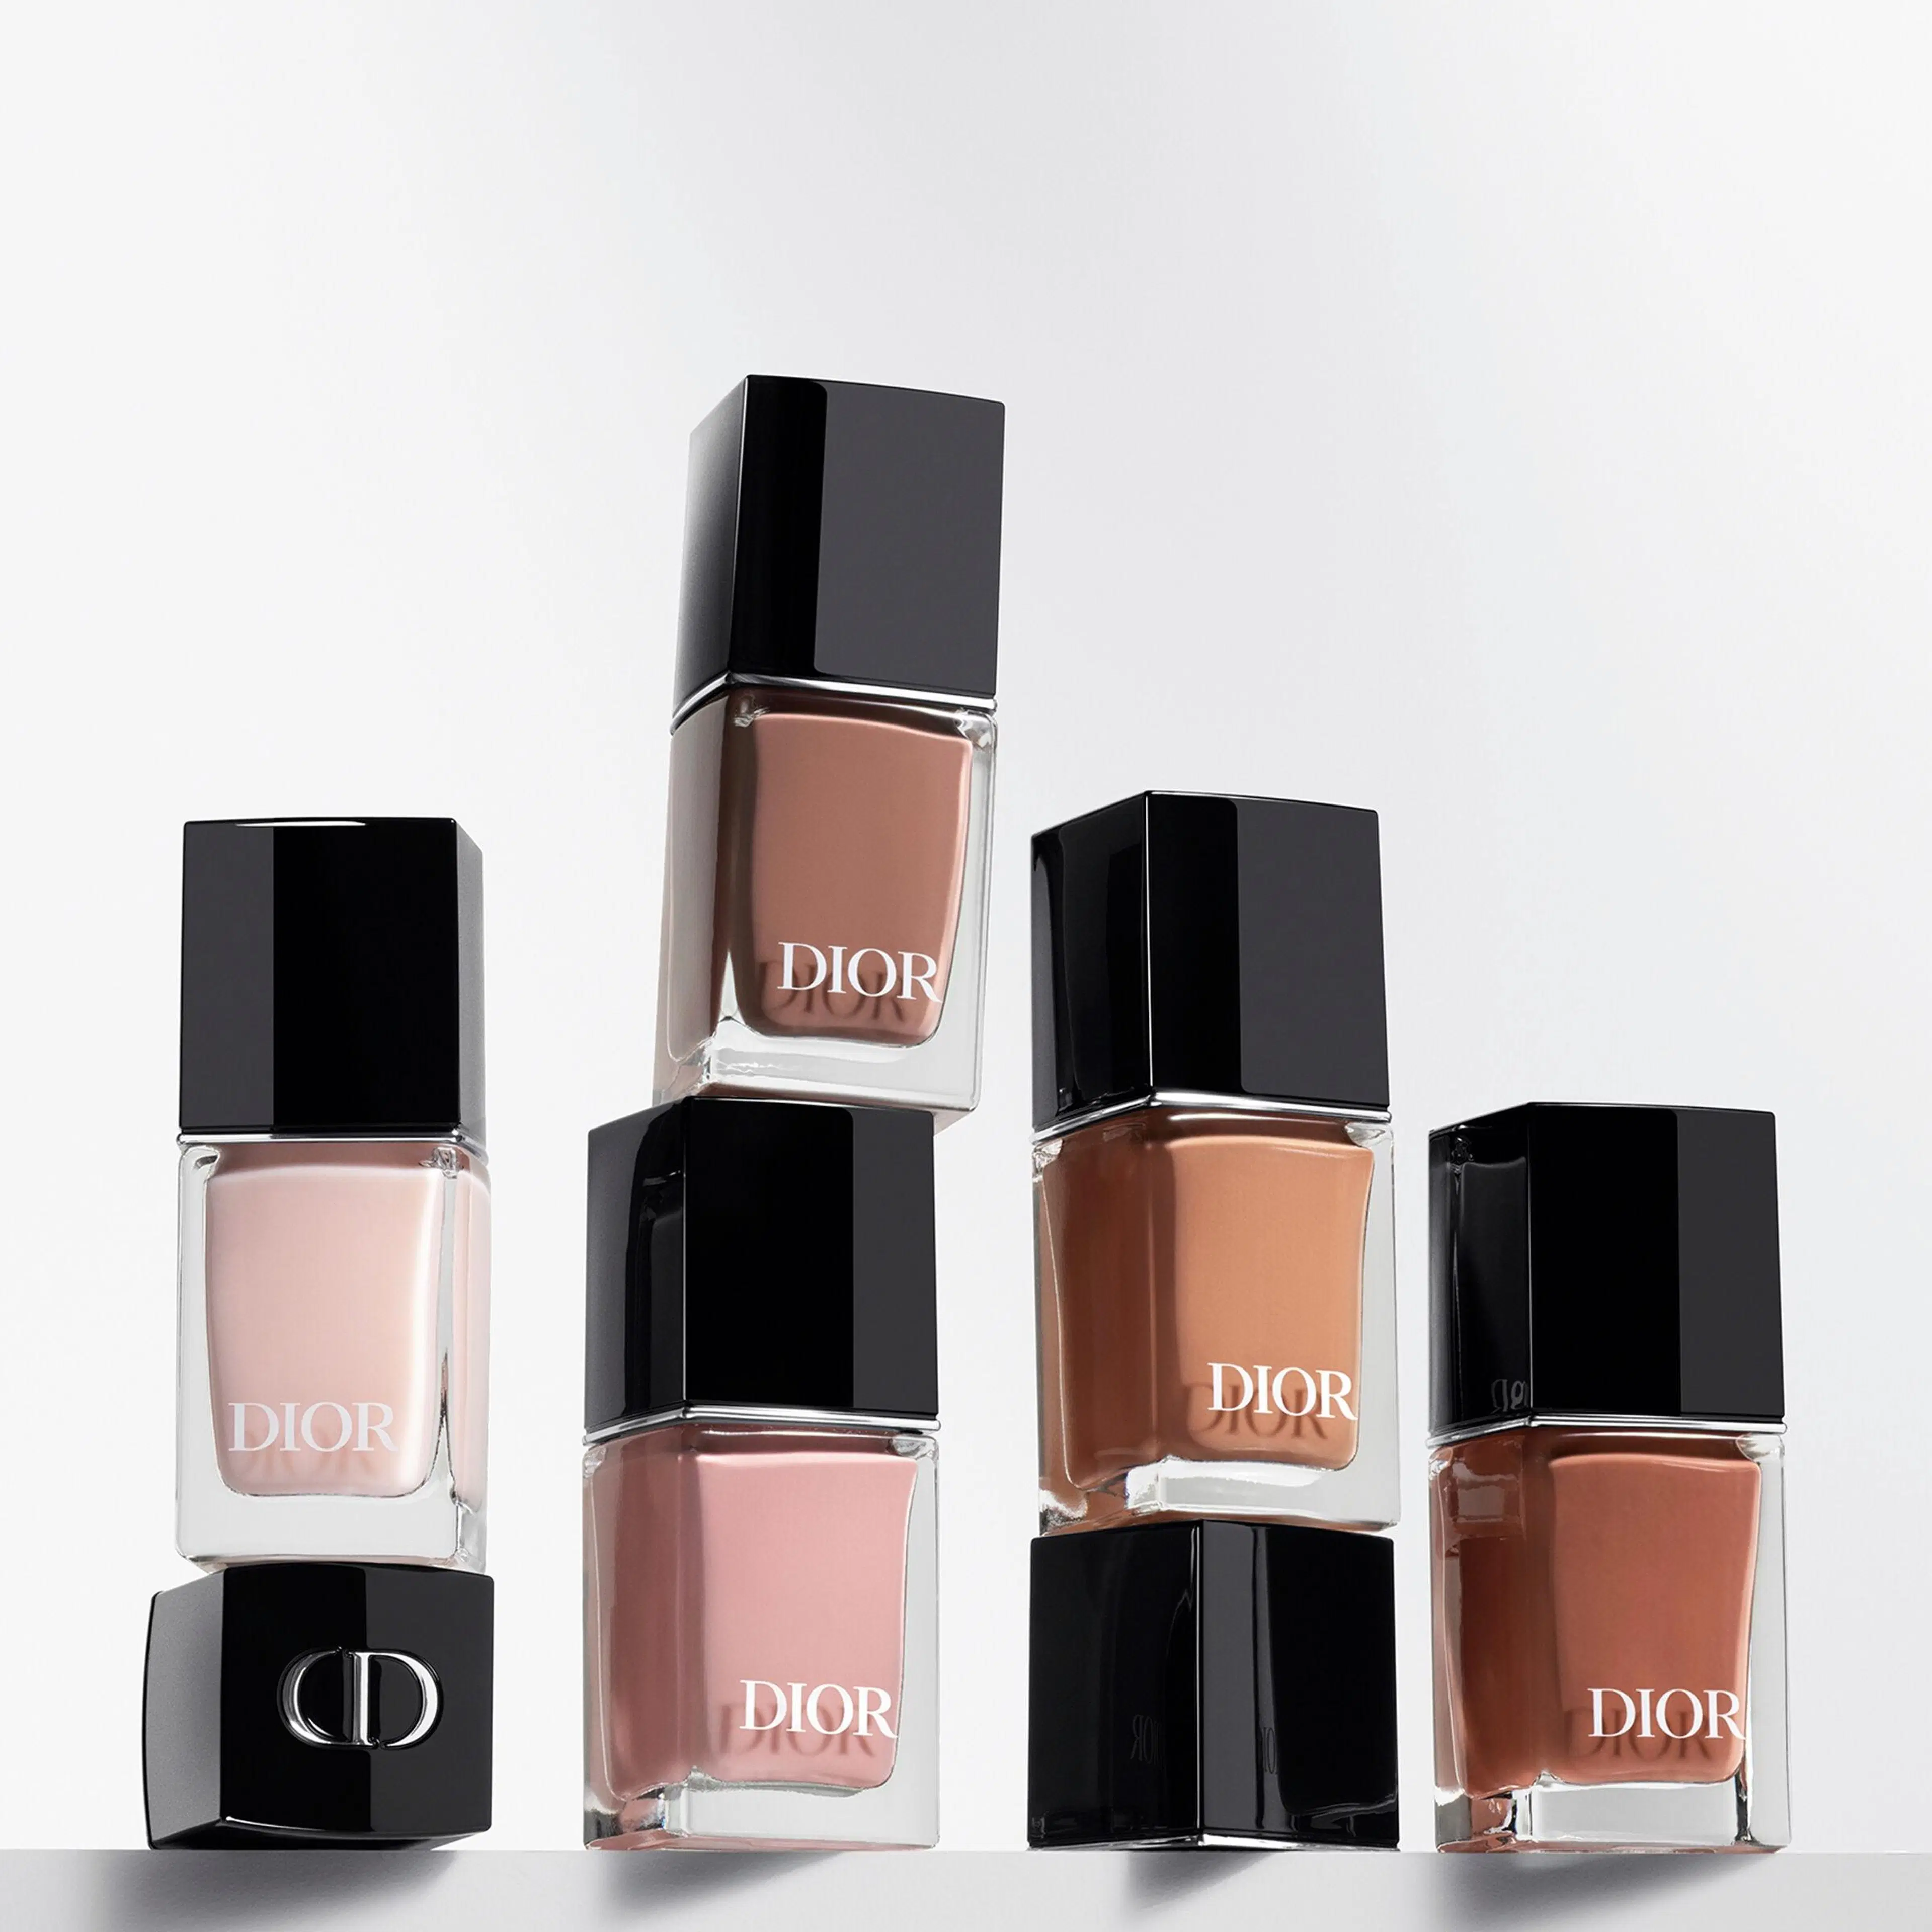 DIOR Vernis Nail Polish with Gel Effect and Couture Color kynsilakka 10 ml